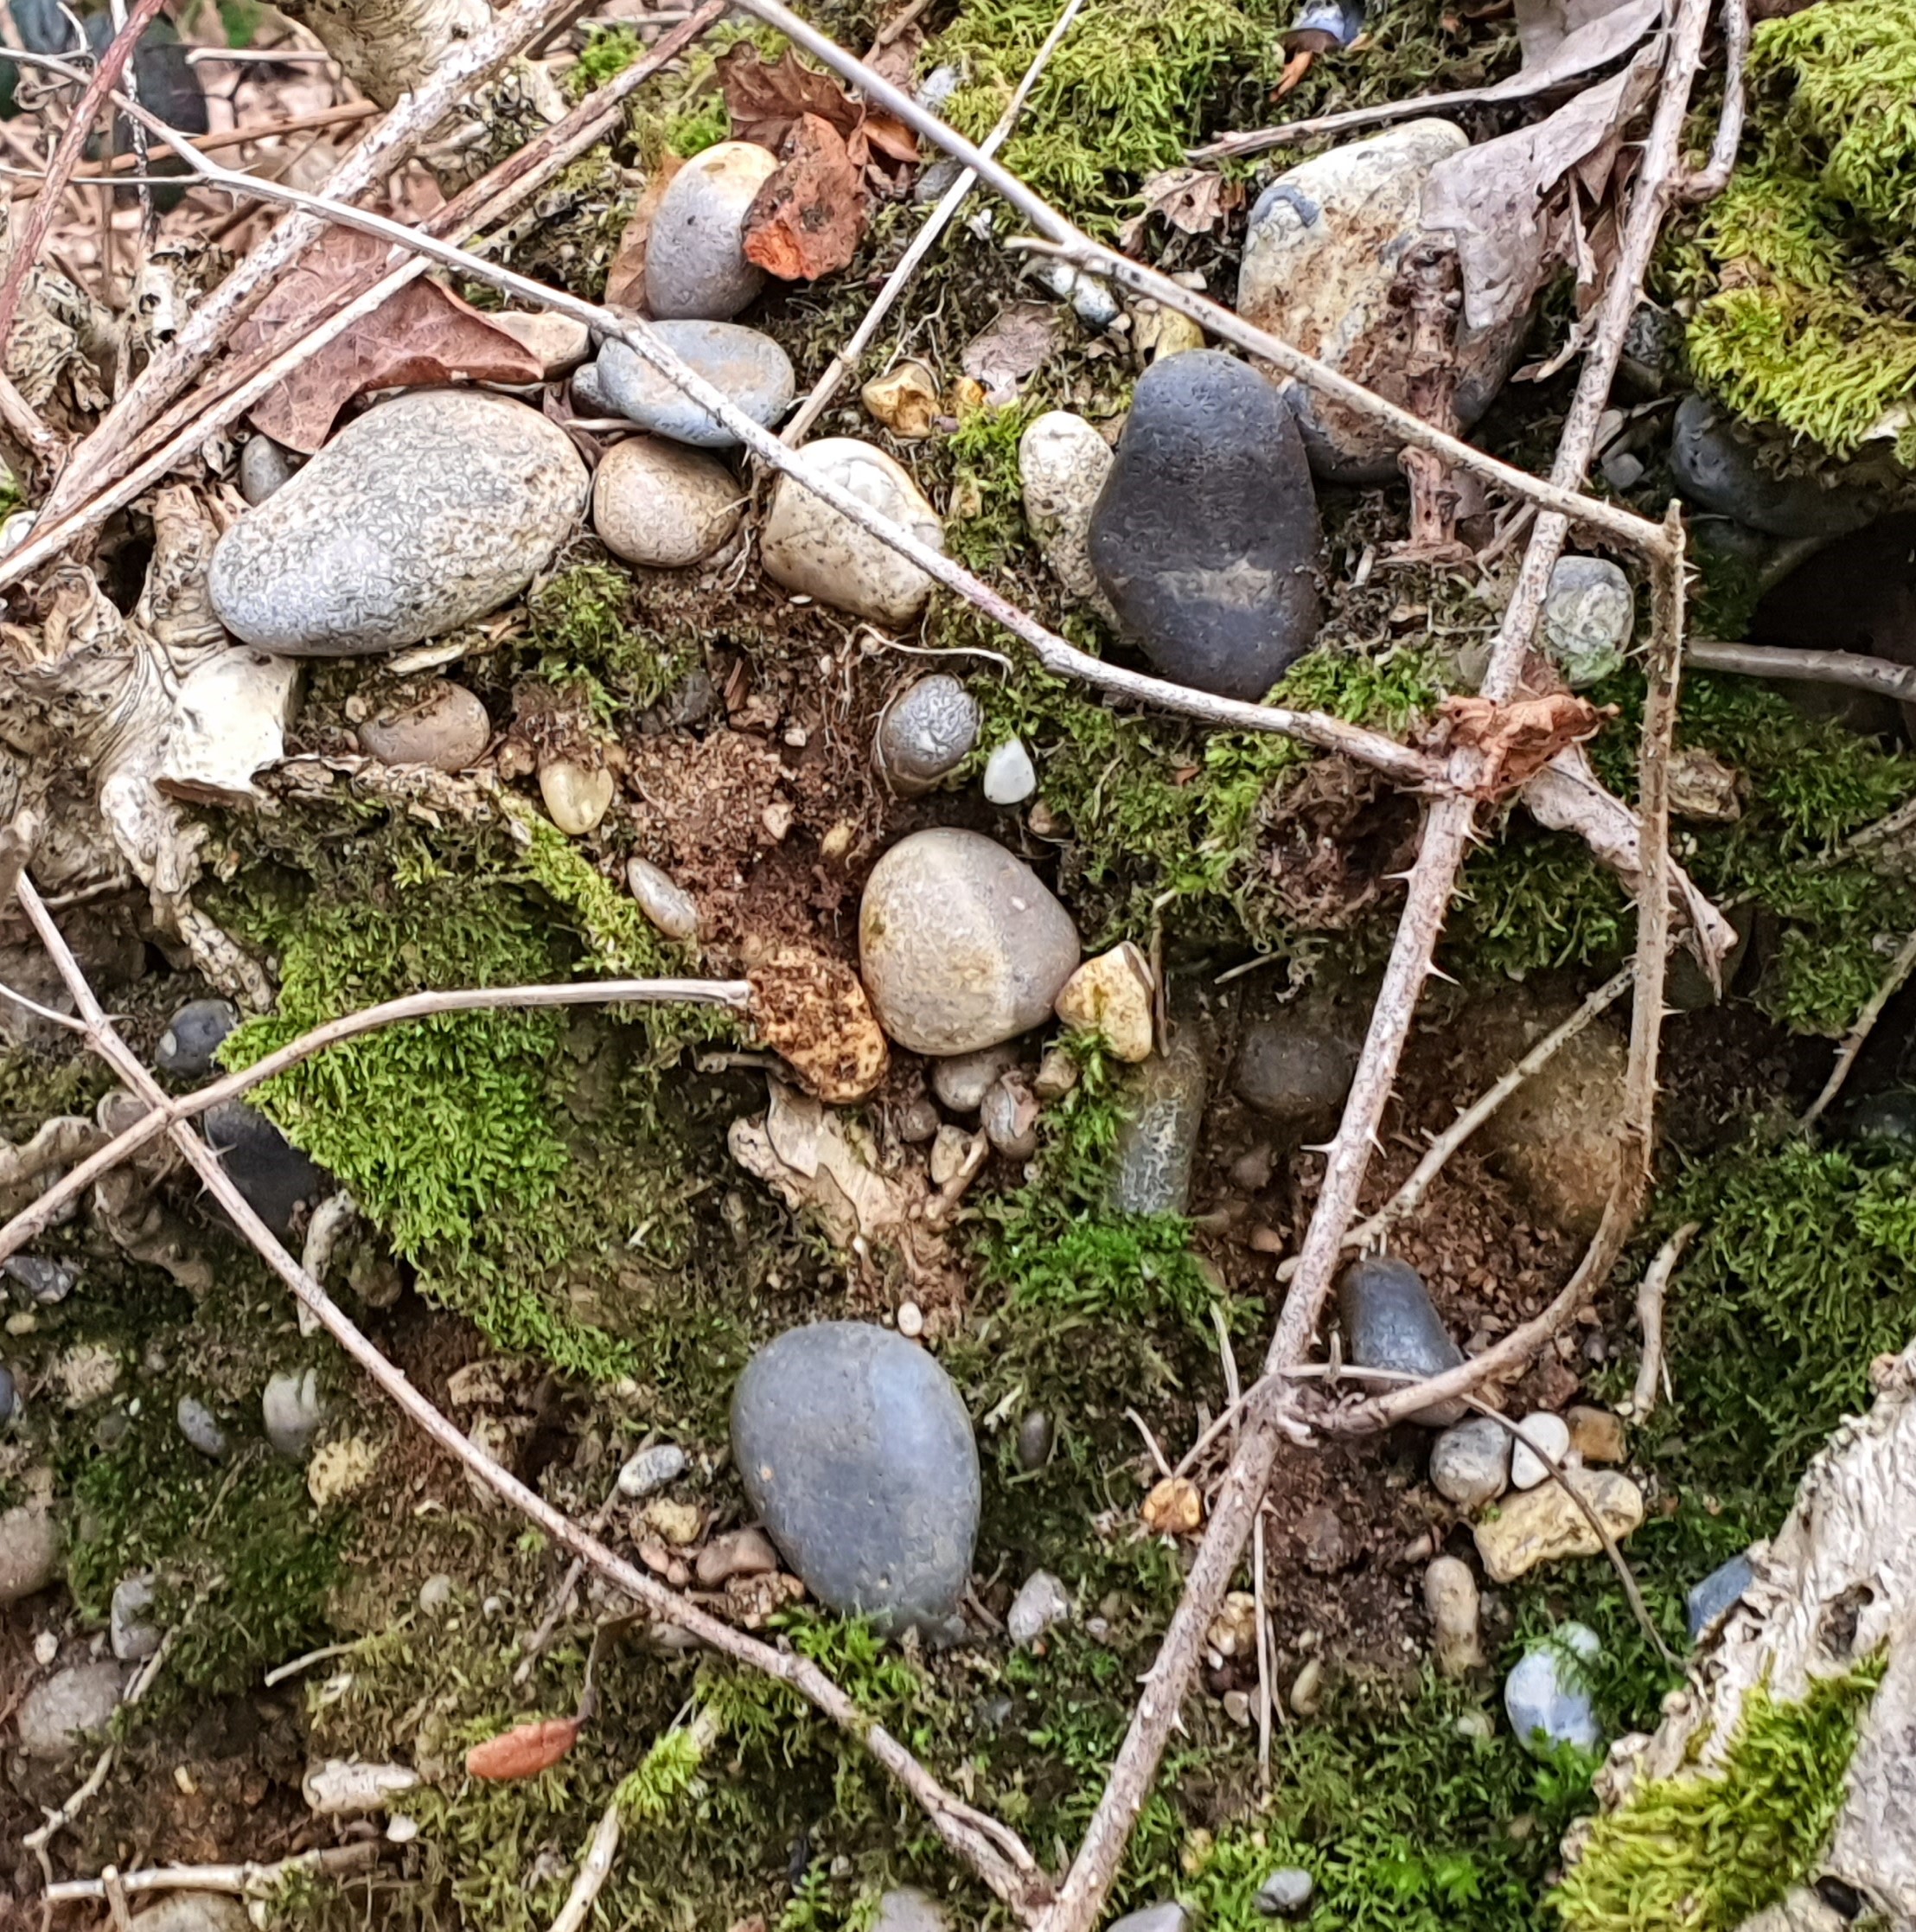 gravel found in a tree root